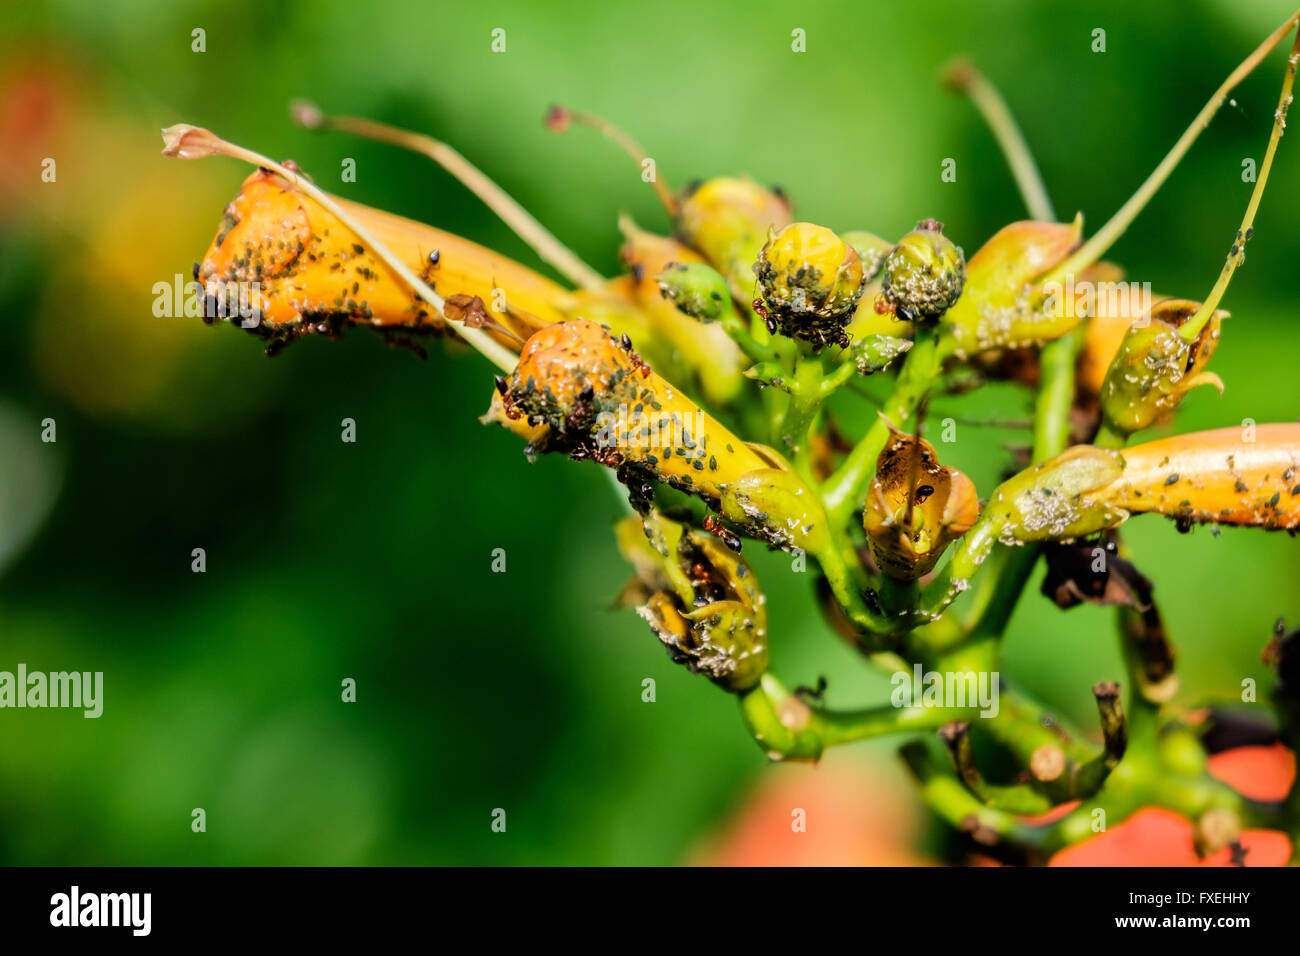 Ants farm Aphids on a blooming trumpet vine, Campis radicans, in Oklahoma, USA Stock Photo